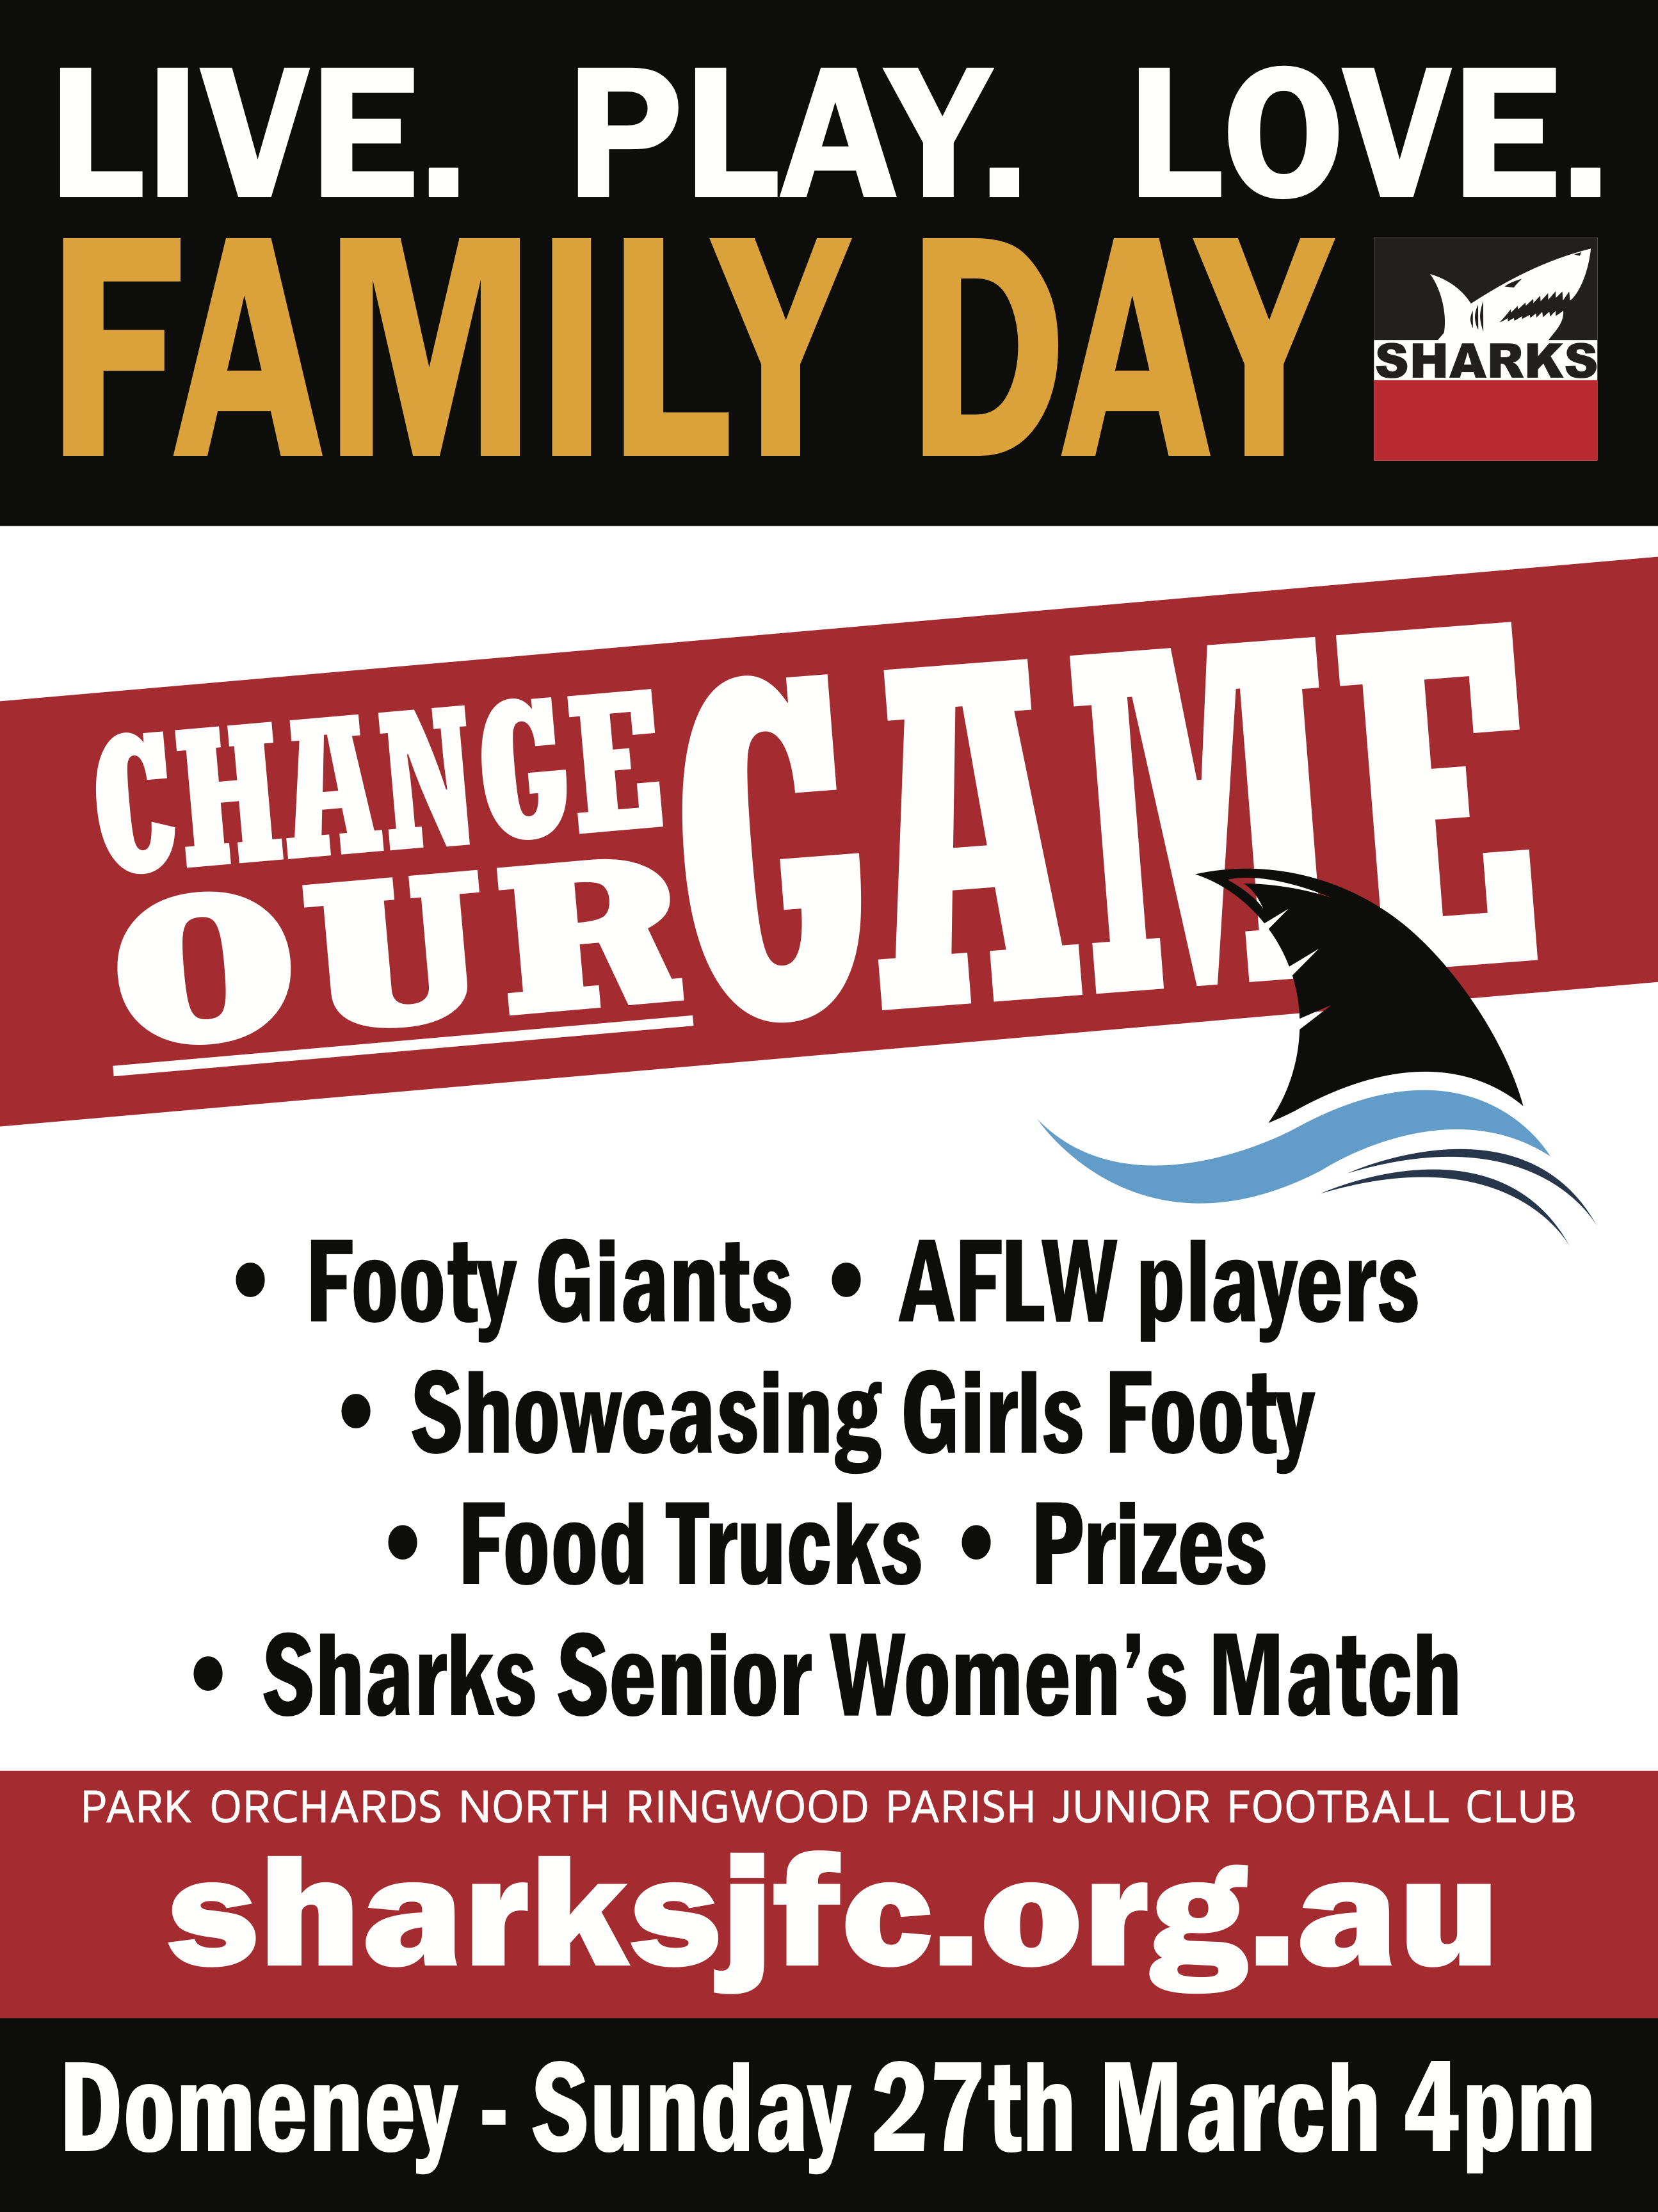 Poster for the Sharks JFC Season 2022 Launch. Live, play, love, Family Day. Change our game. Domeney Sunday 27 March 4pm